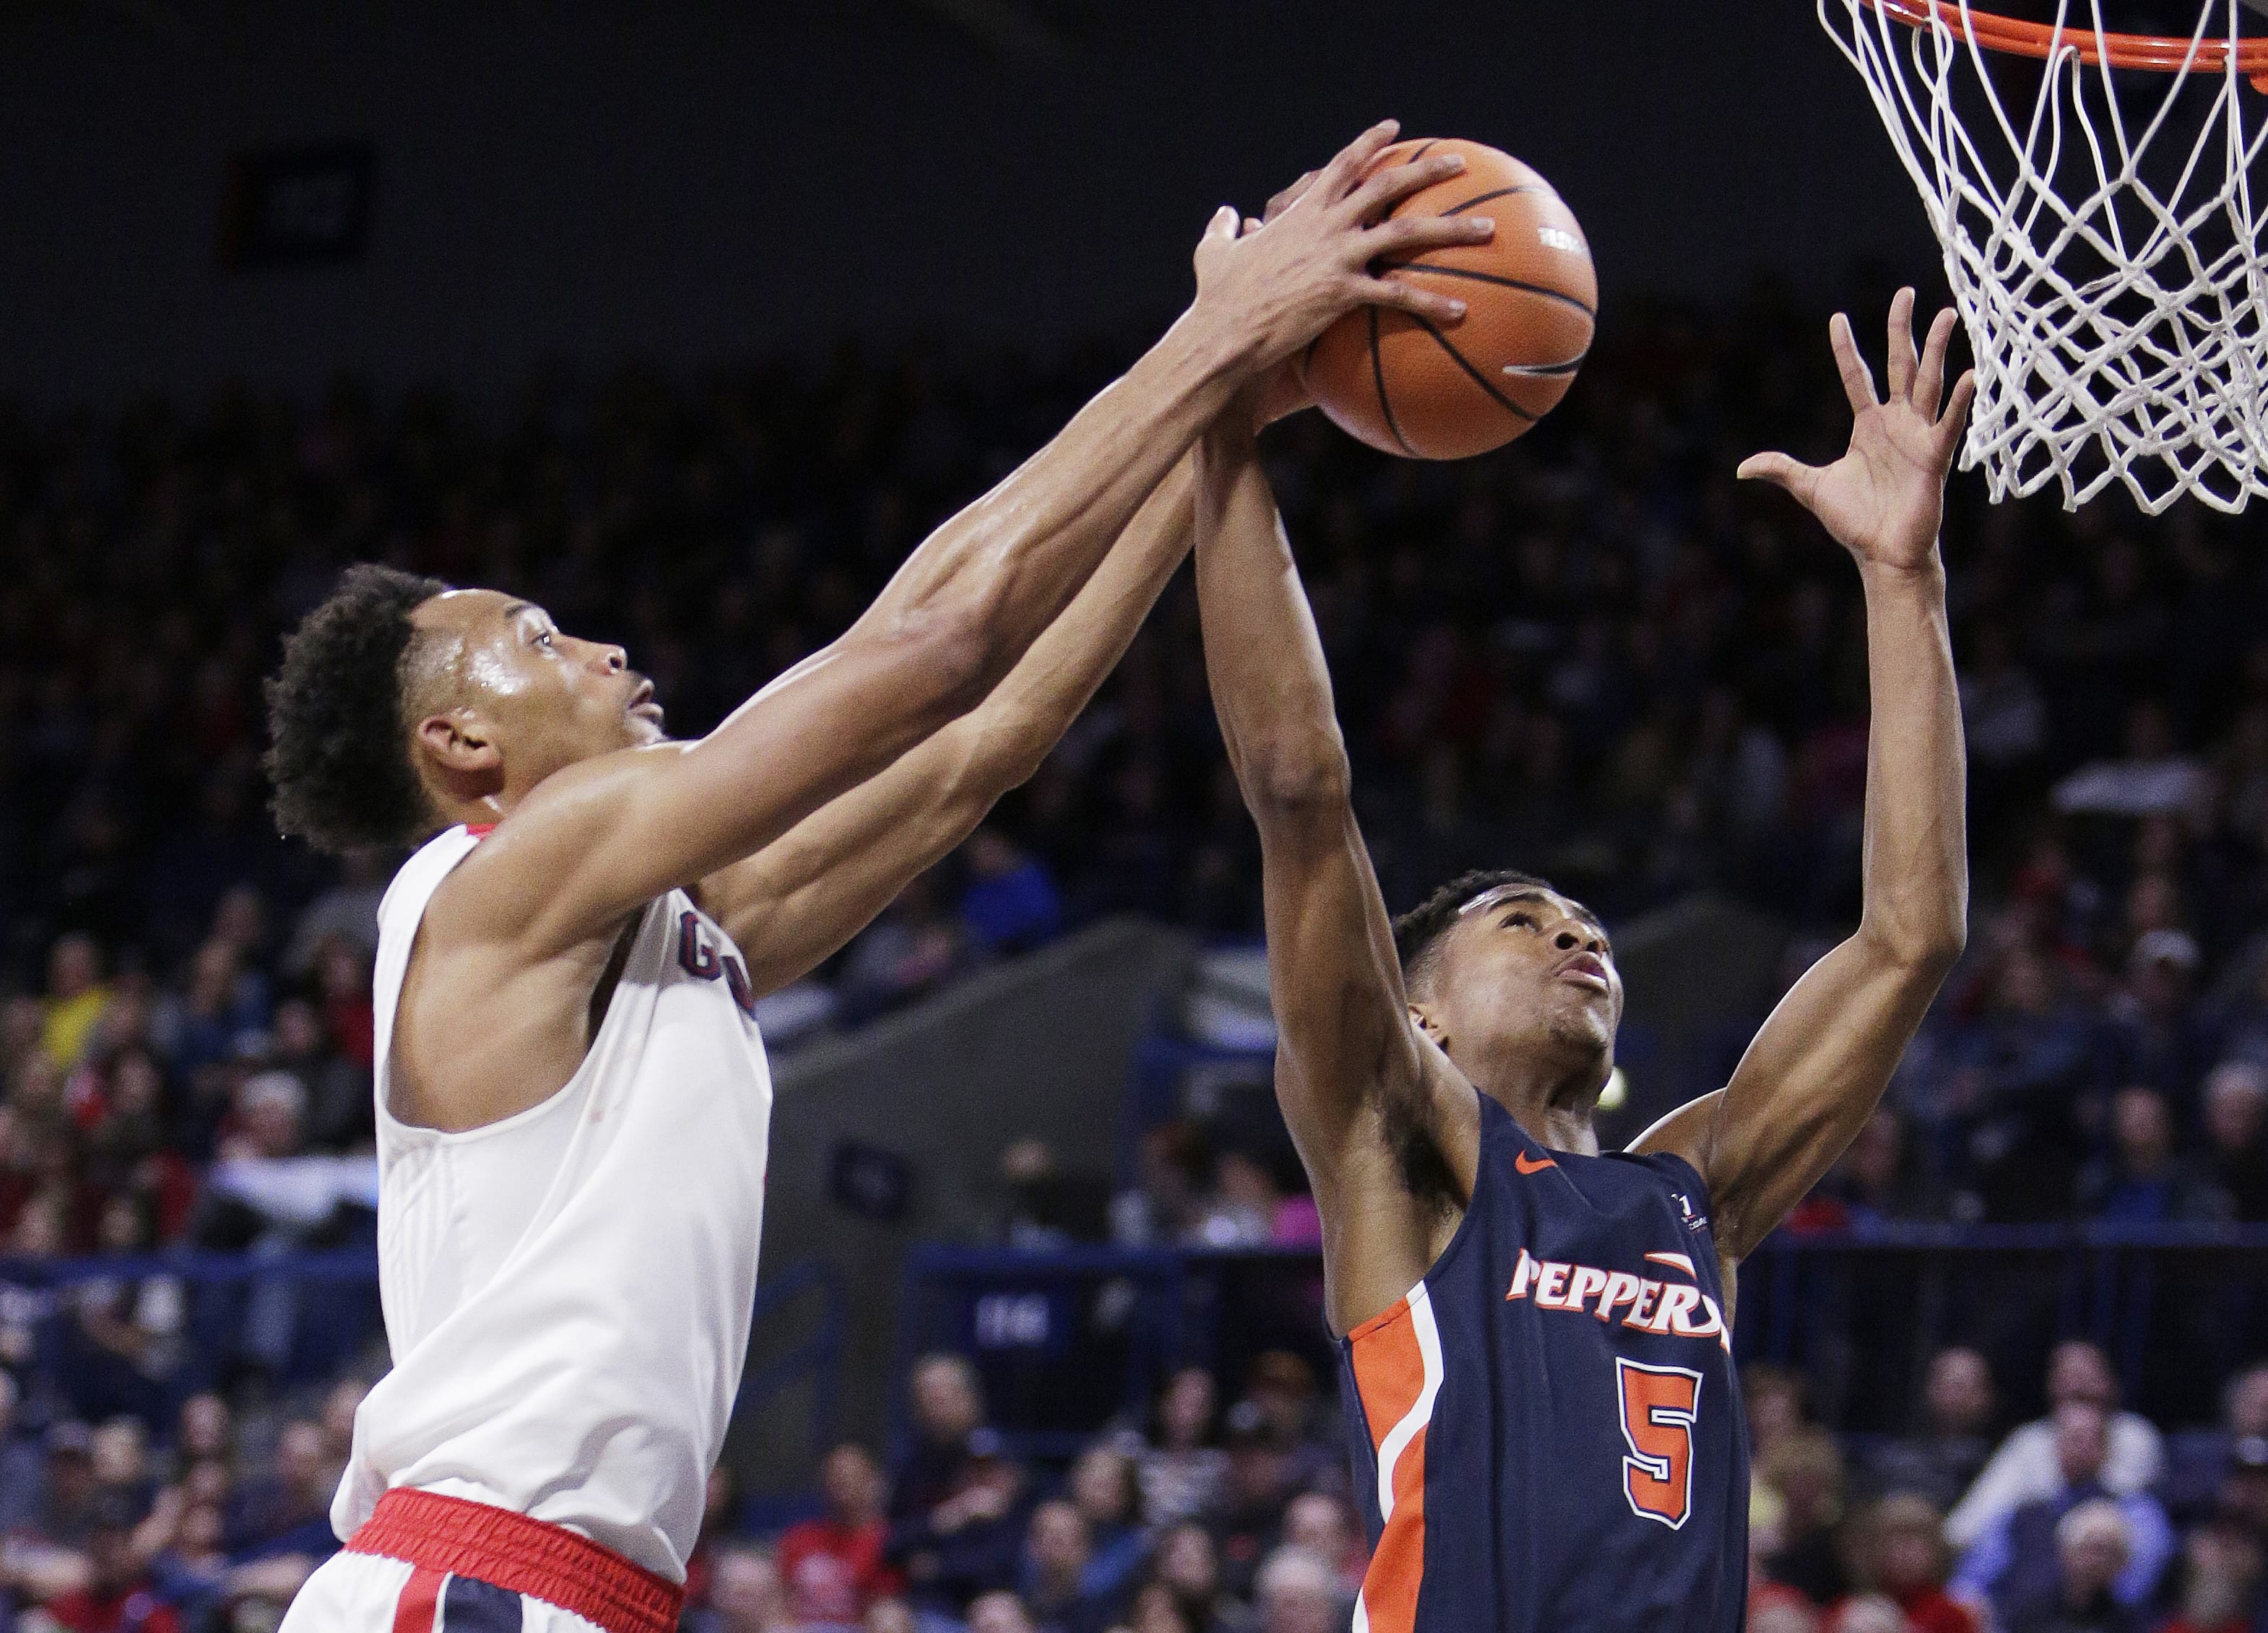 Pepperdine guard Jade' Smith (5) and Gonzaga forward Johnathan Williams go after a rebound during the first half of an NCAA college basketball game in Spokane, Wash., Saturday, Feb. 17, 2018.